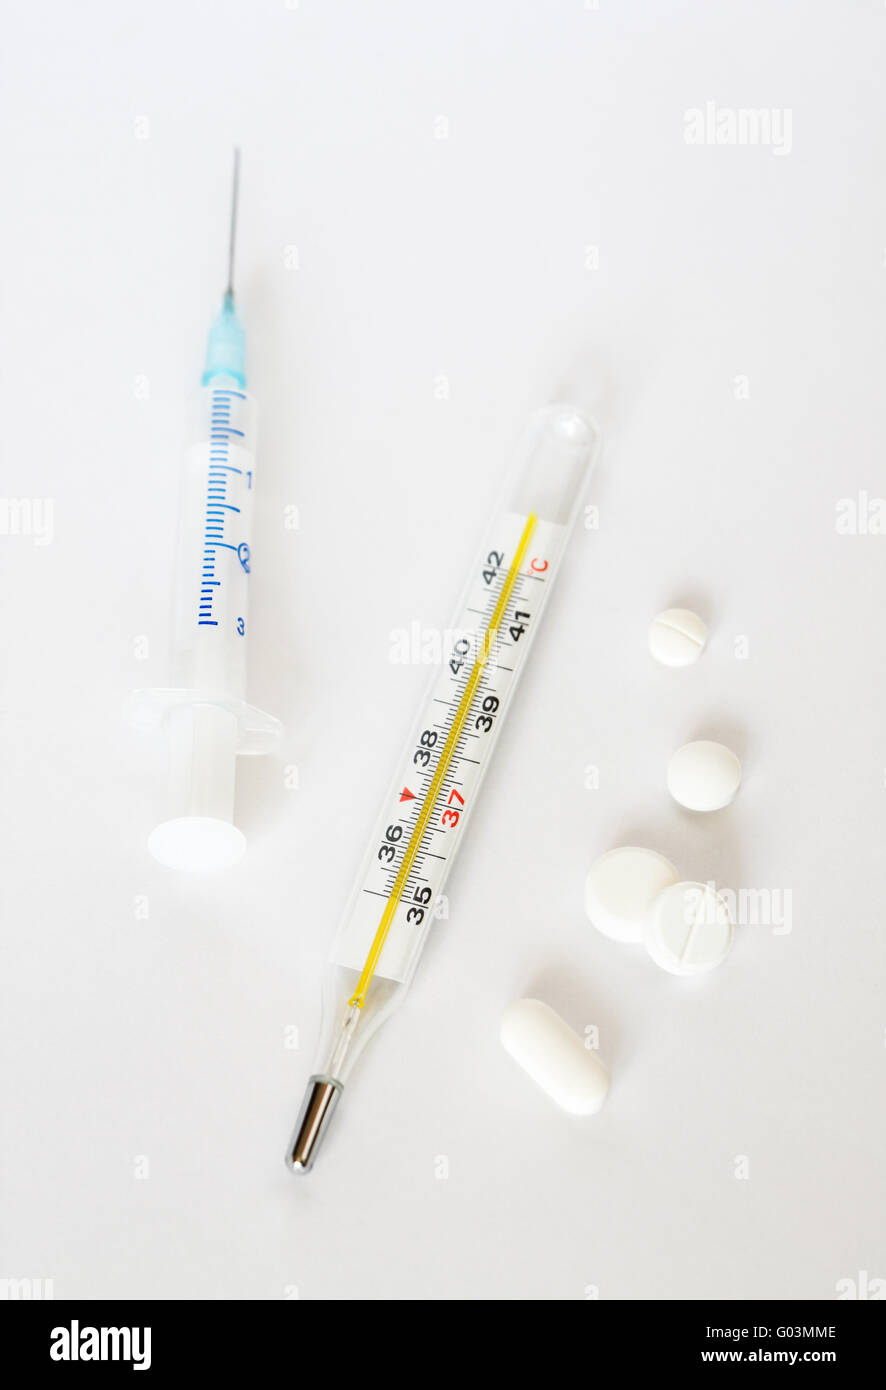 https://c8.alamy.com/comp/G03MME/clinical-thermometer-medical-syringe-and-white-pi-G03MME.jpg